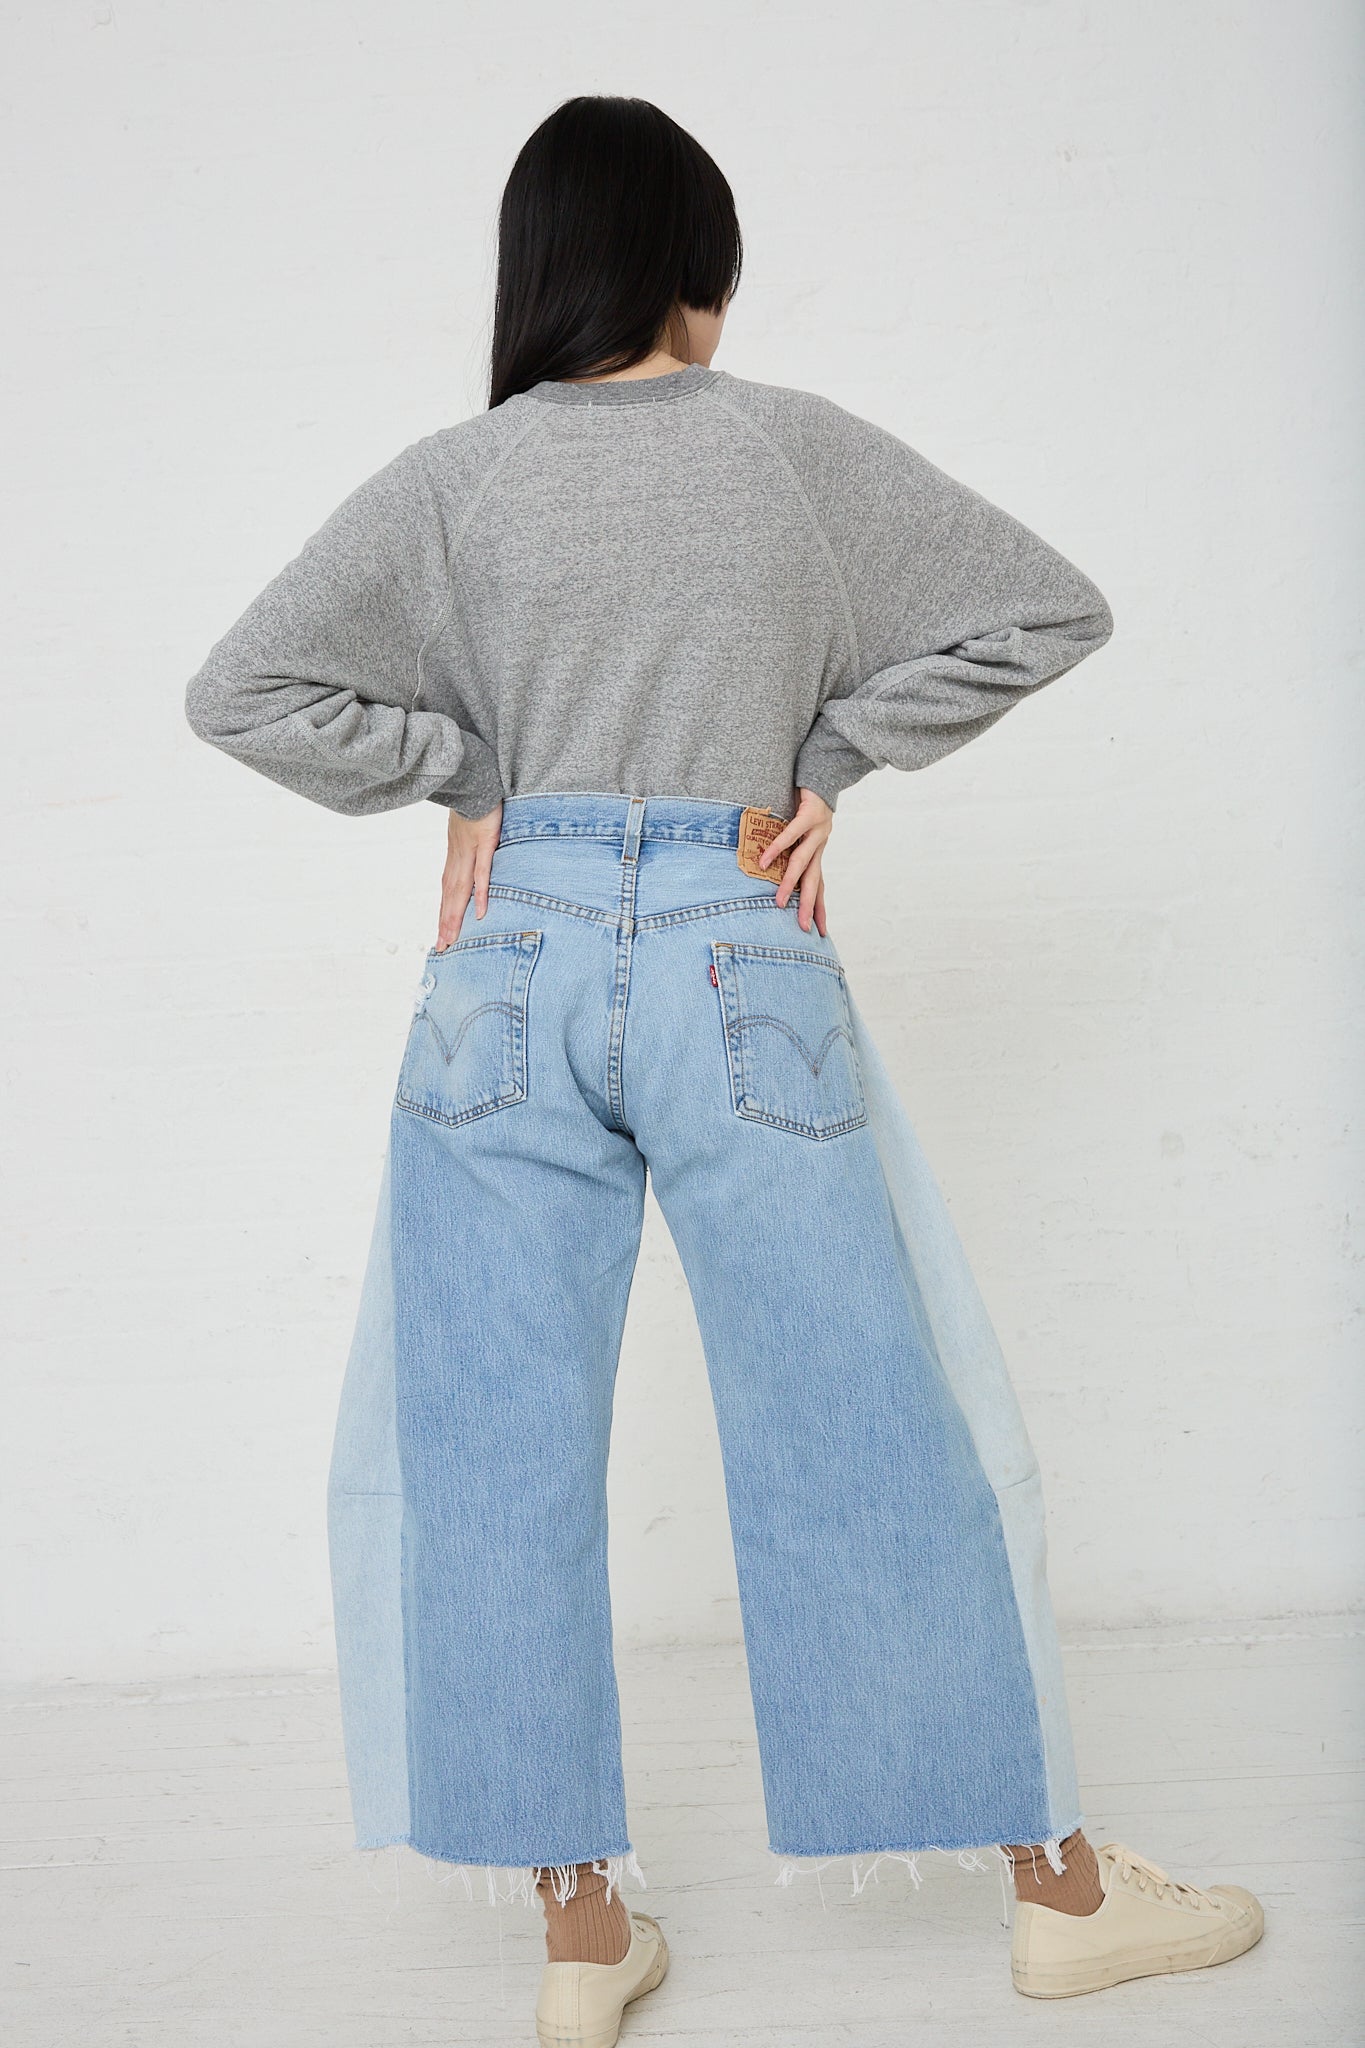 A woman in B Sides' Lasso Jean in Vintage Indigo with a cutoff frayed hem. Back view and full length.